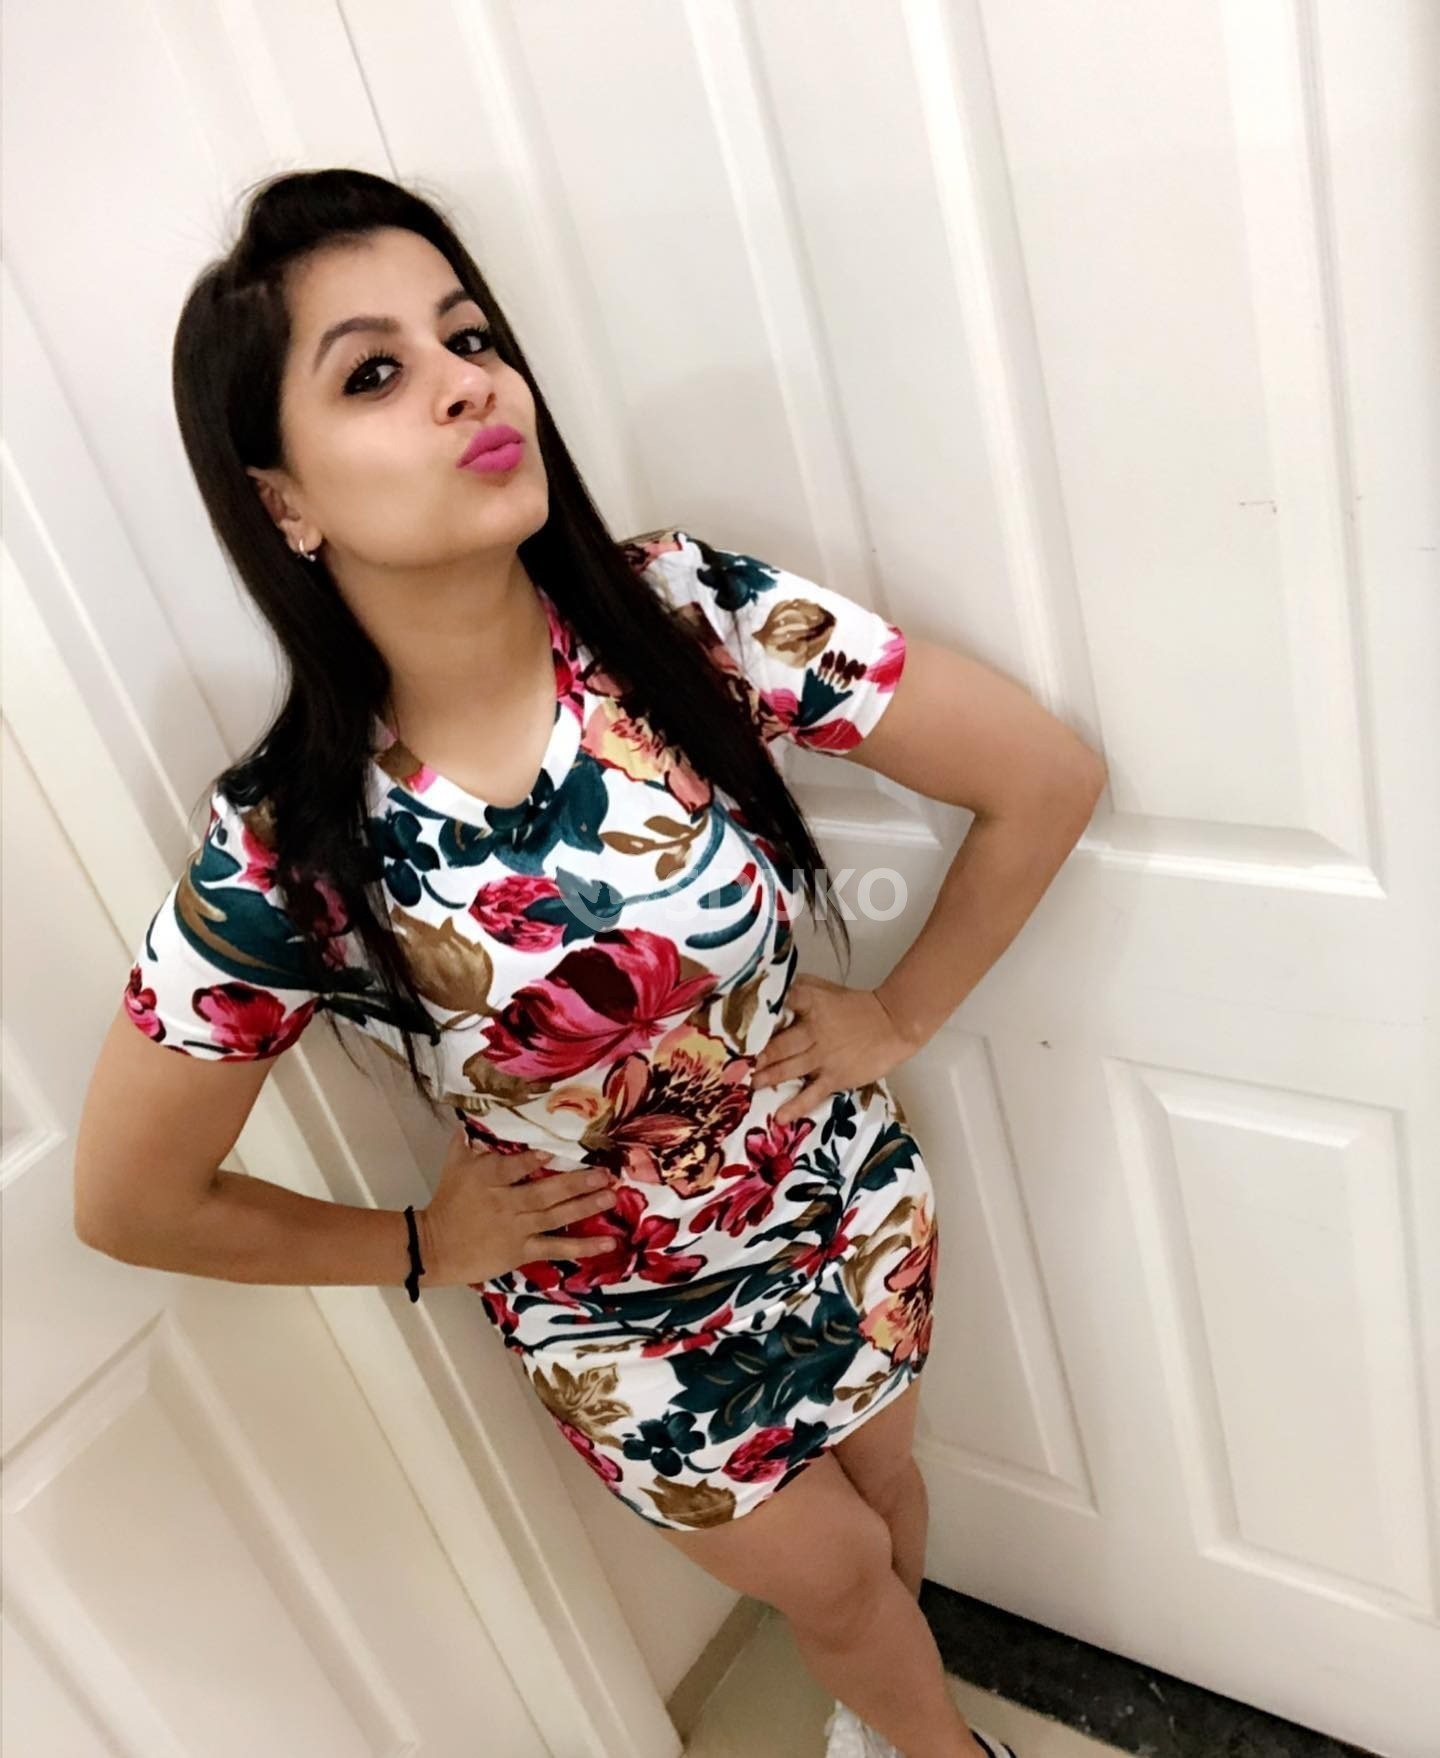 Pondicherry top model ✅ 24x7 AFFORDABLE CHEAPEST RATE SAFE CALL GIRL SERVICE AVAILABLE OUTCALL AVAILABLE..